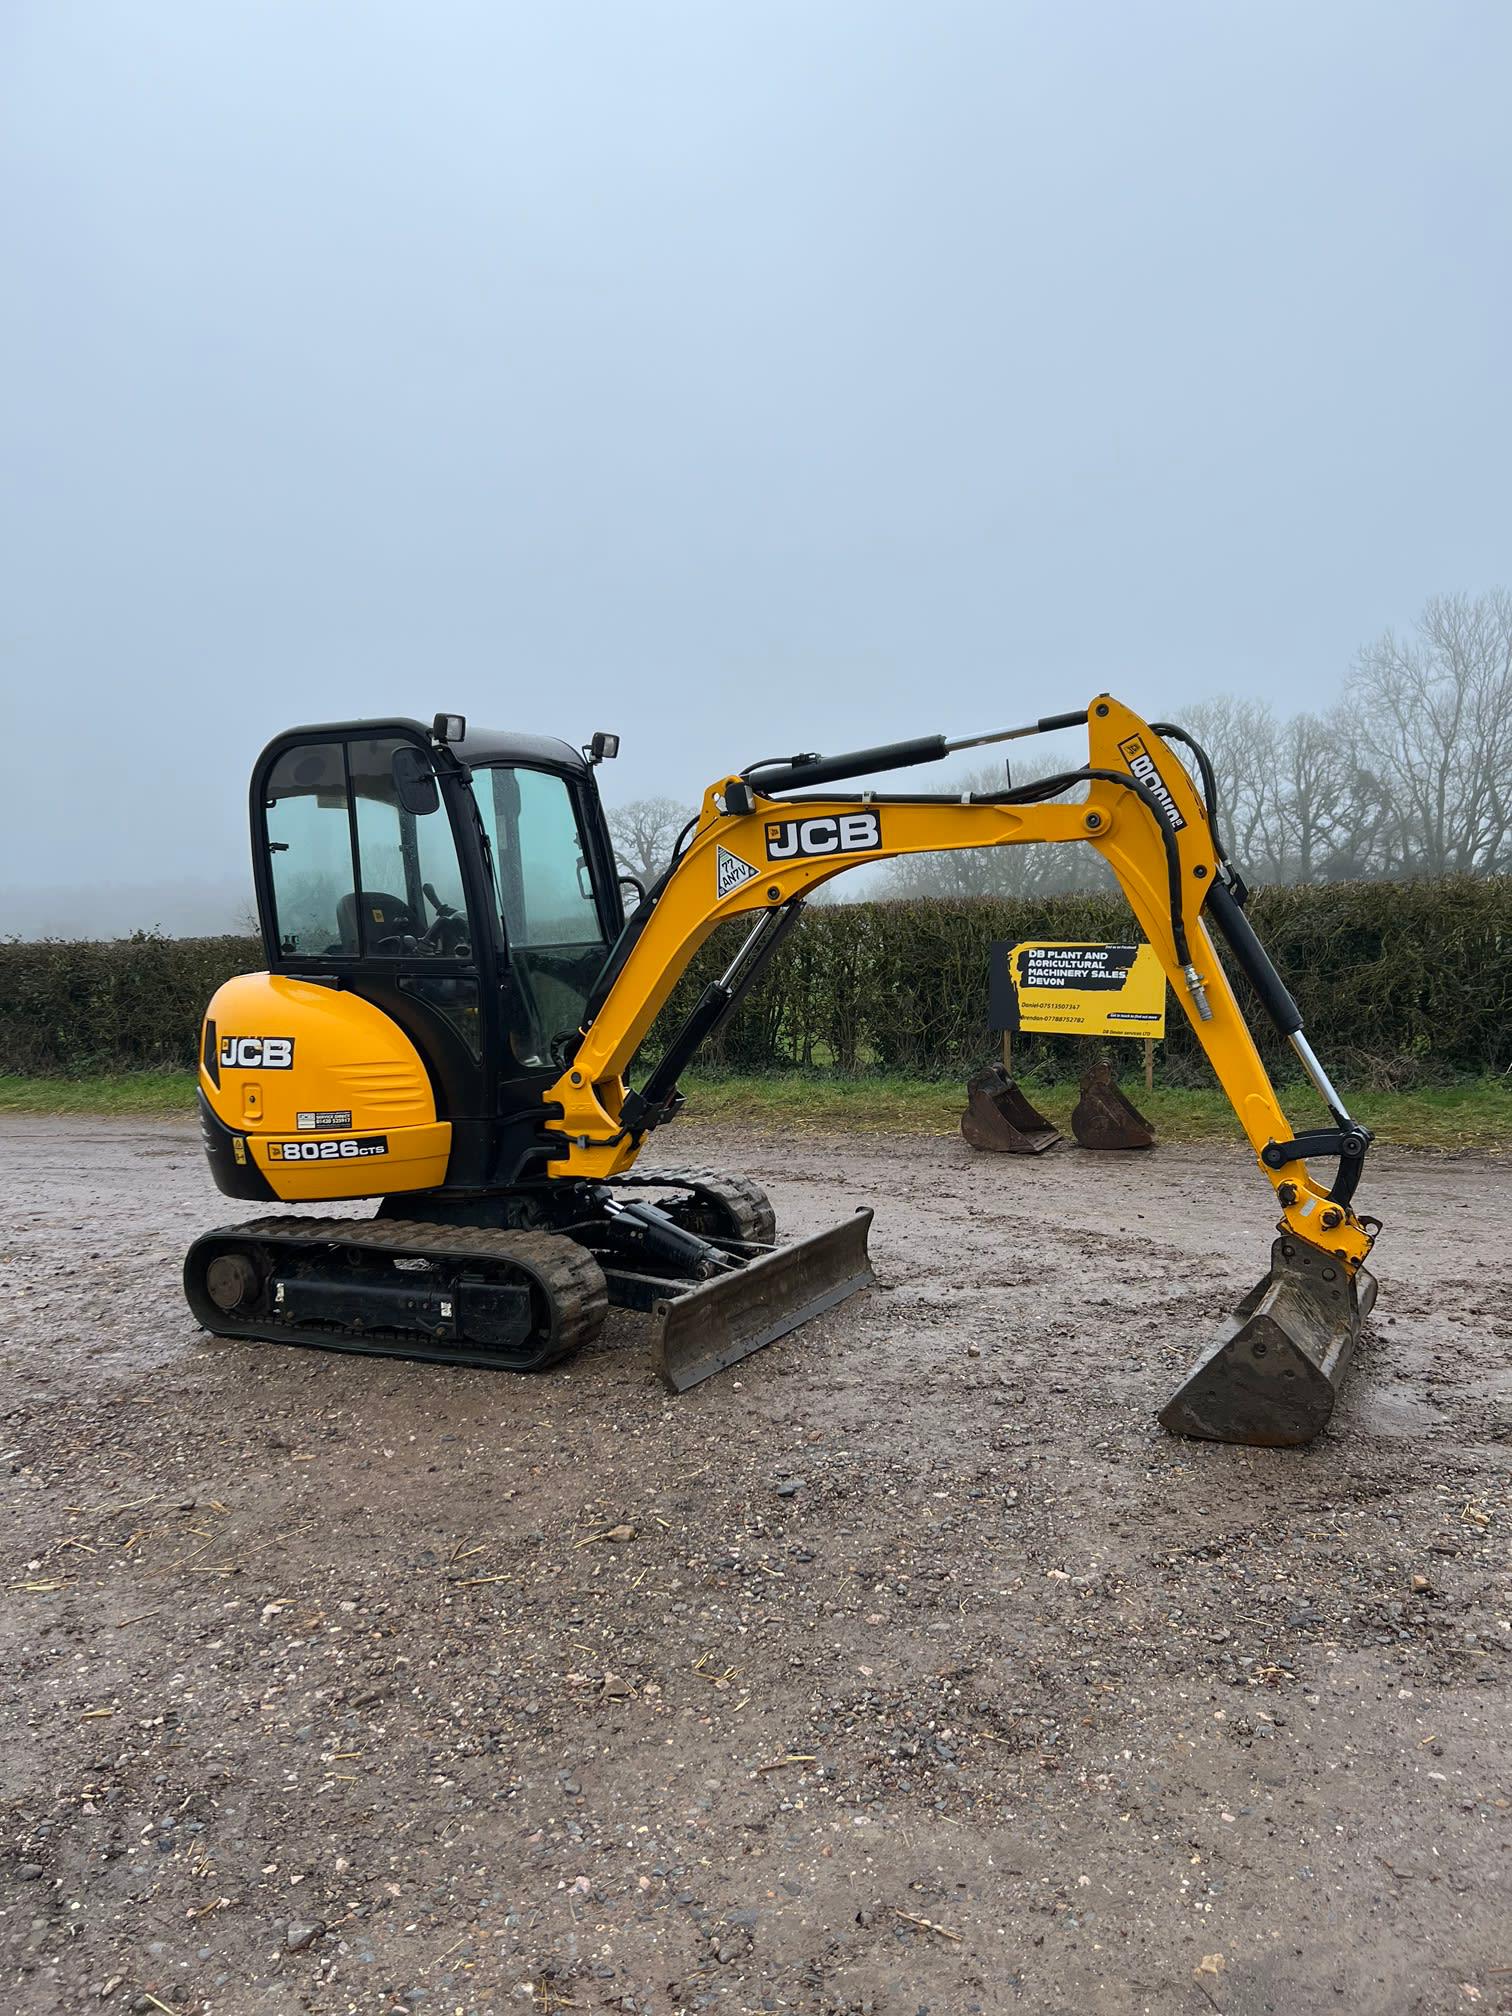 DB Plant and Agricultural Machinery Sales Devon Honiton 07513 507347